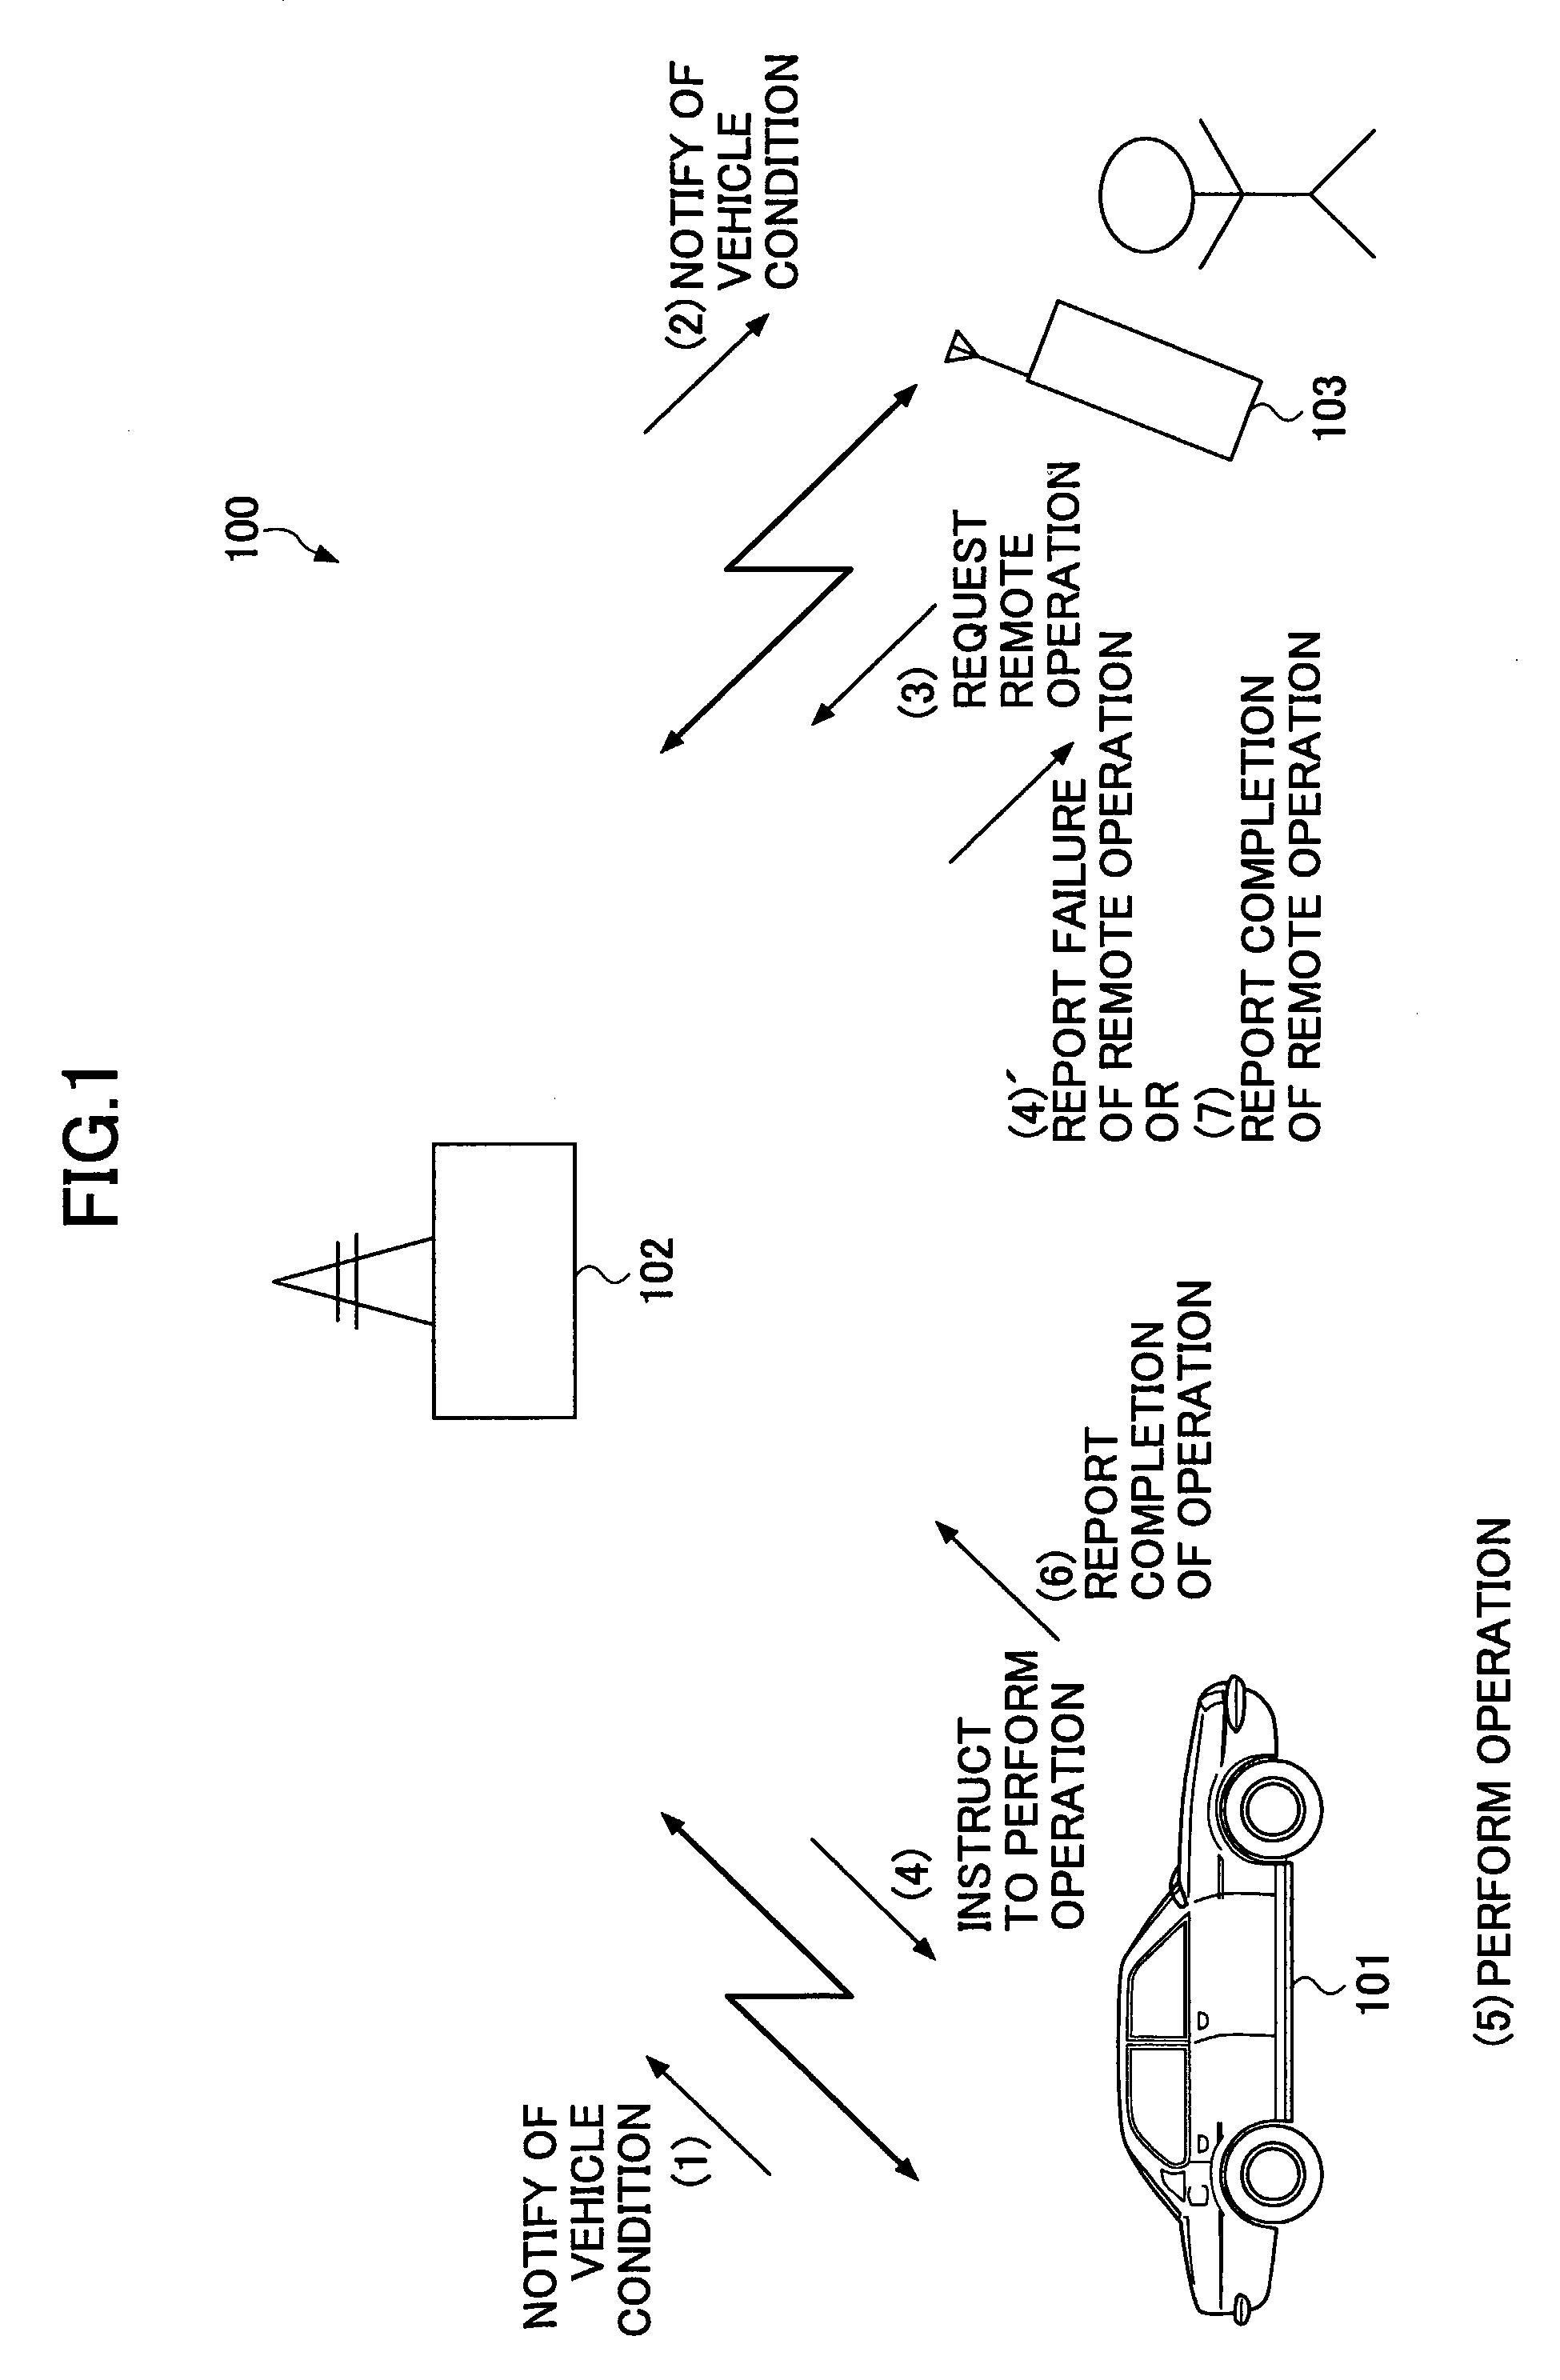 Vehicle remote control apparatus and system